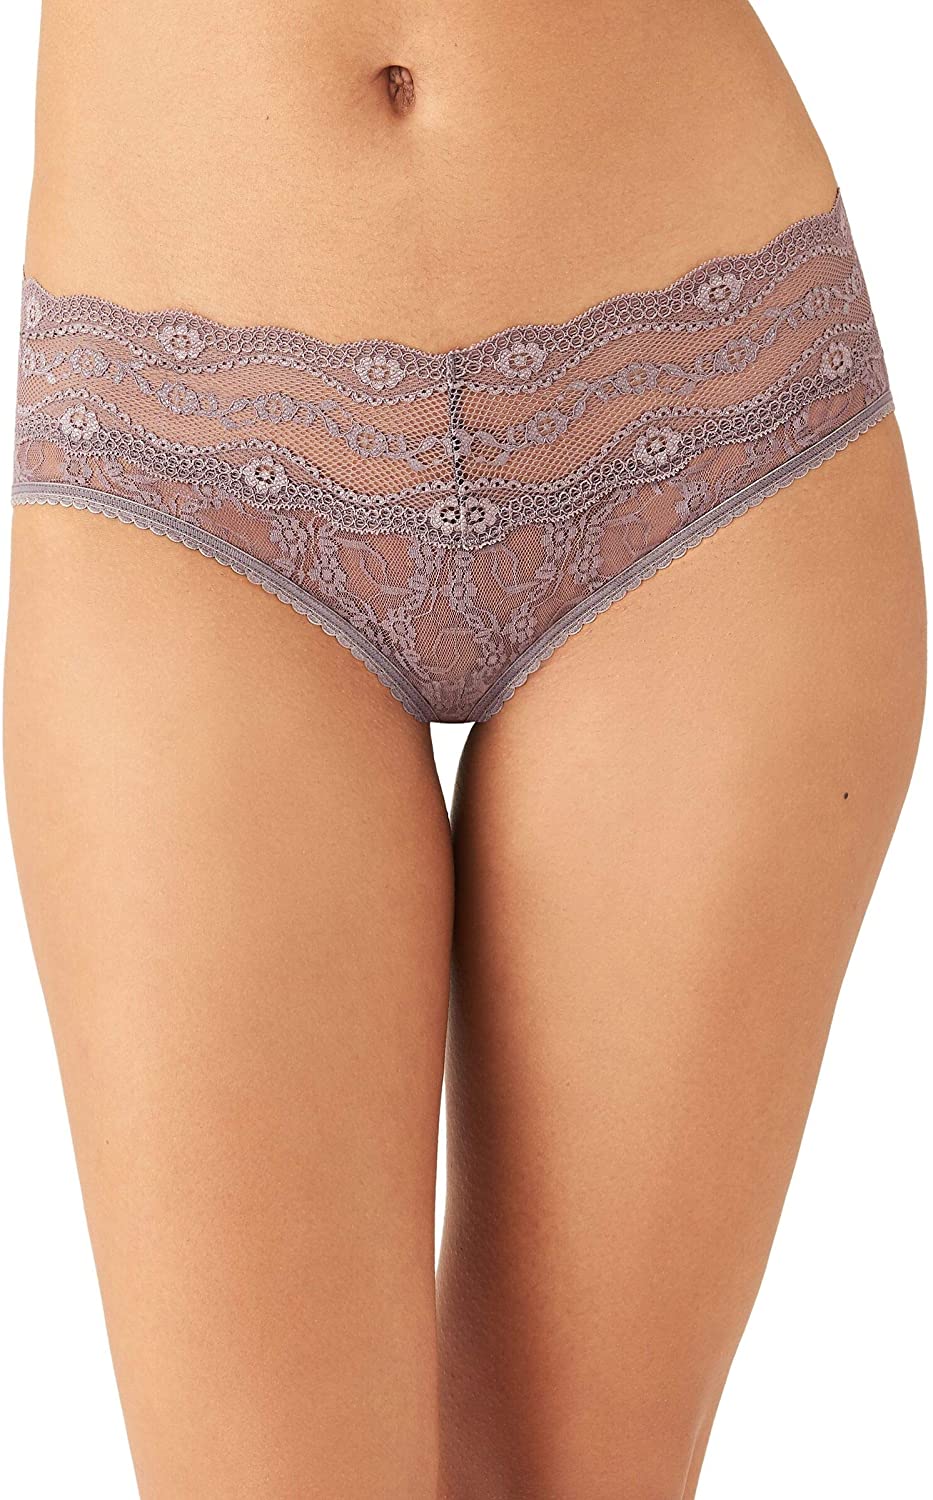 Price:$7.95 b.tempt'd Women's Lace Kiss Hipster Panty at Amazon Women’s Clothing store